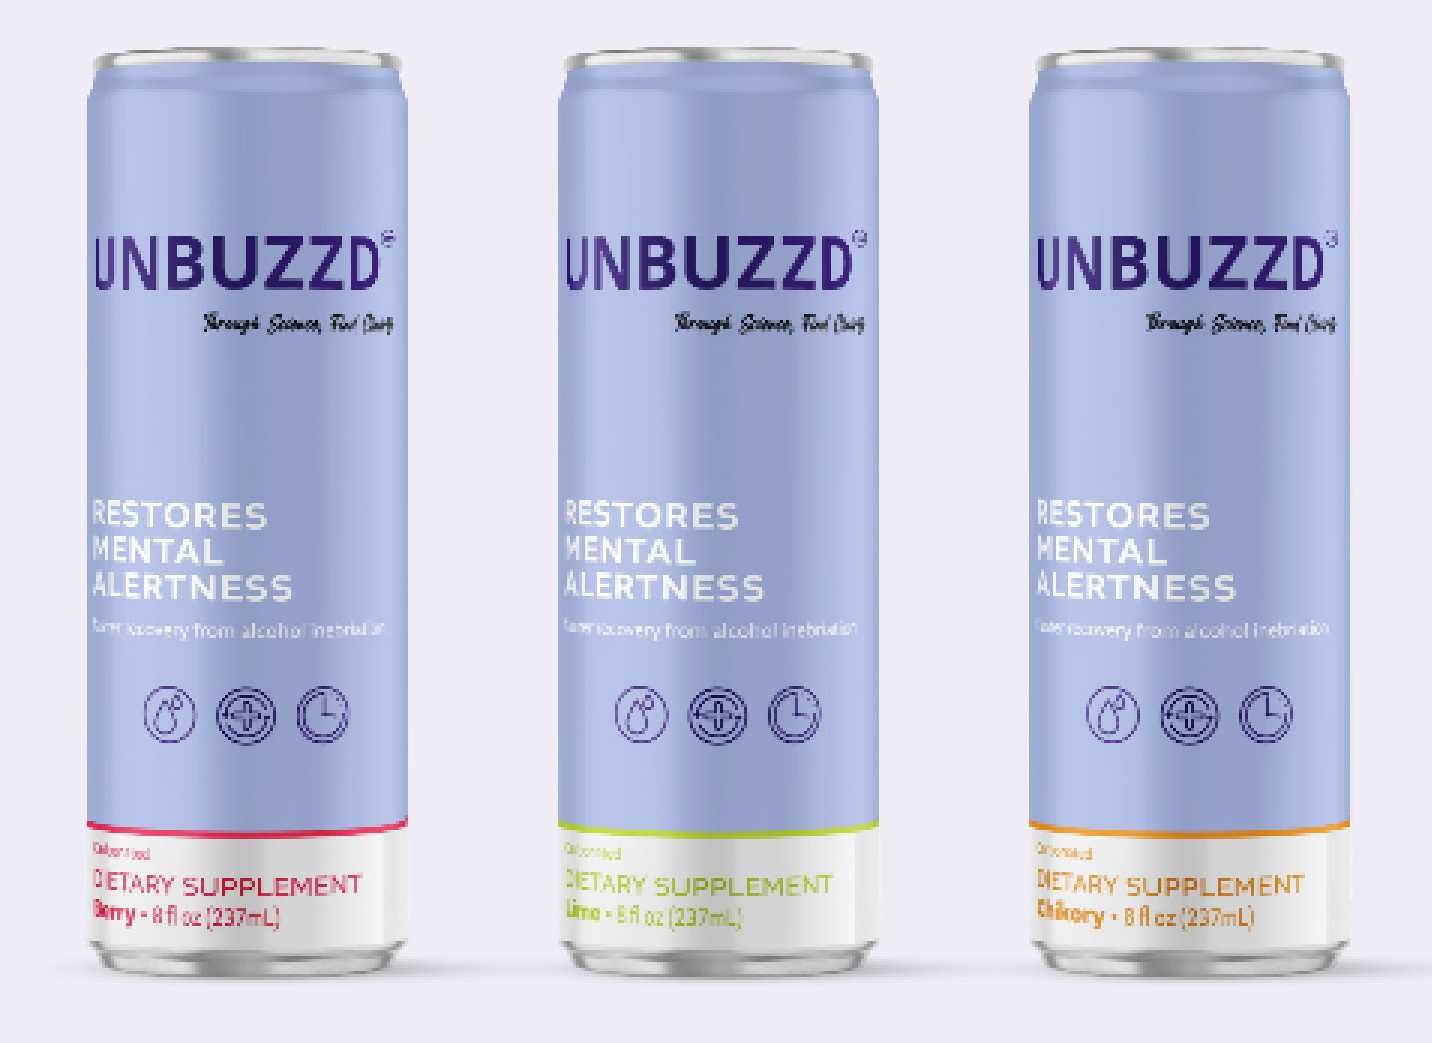 FSD Pharma's Stake In Functional Beverage, UNBUZZD™, Is A Transformational Asset...Here's Why